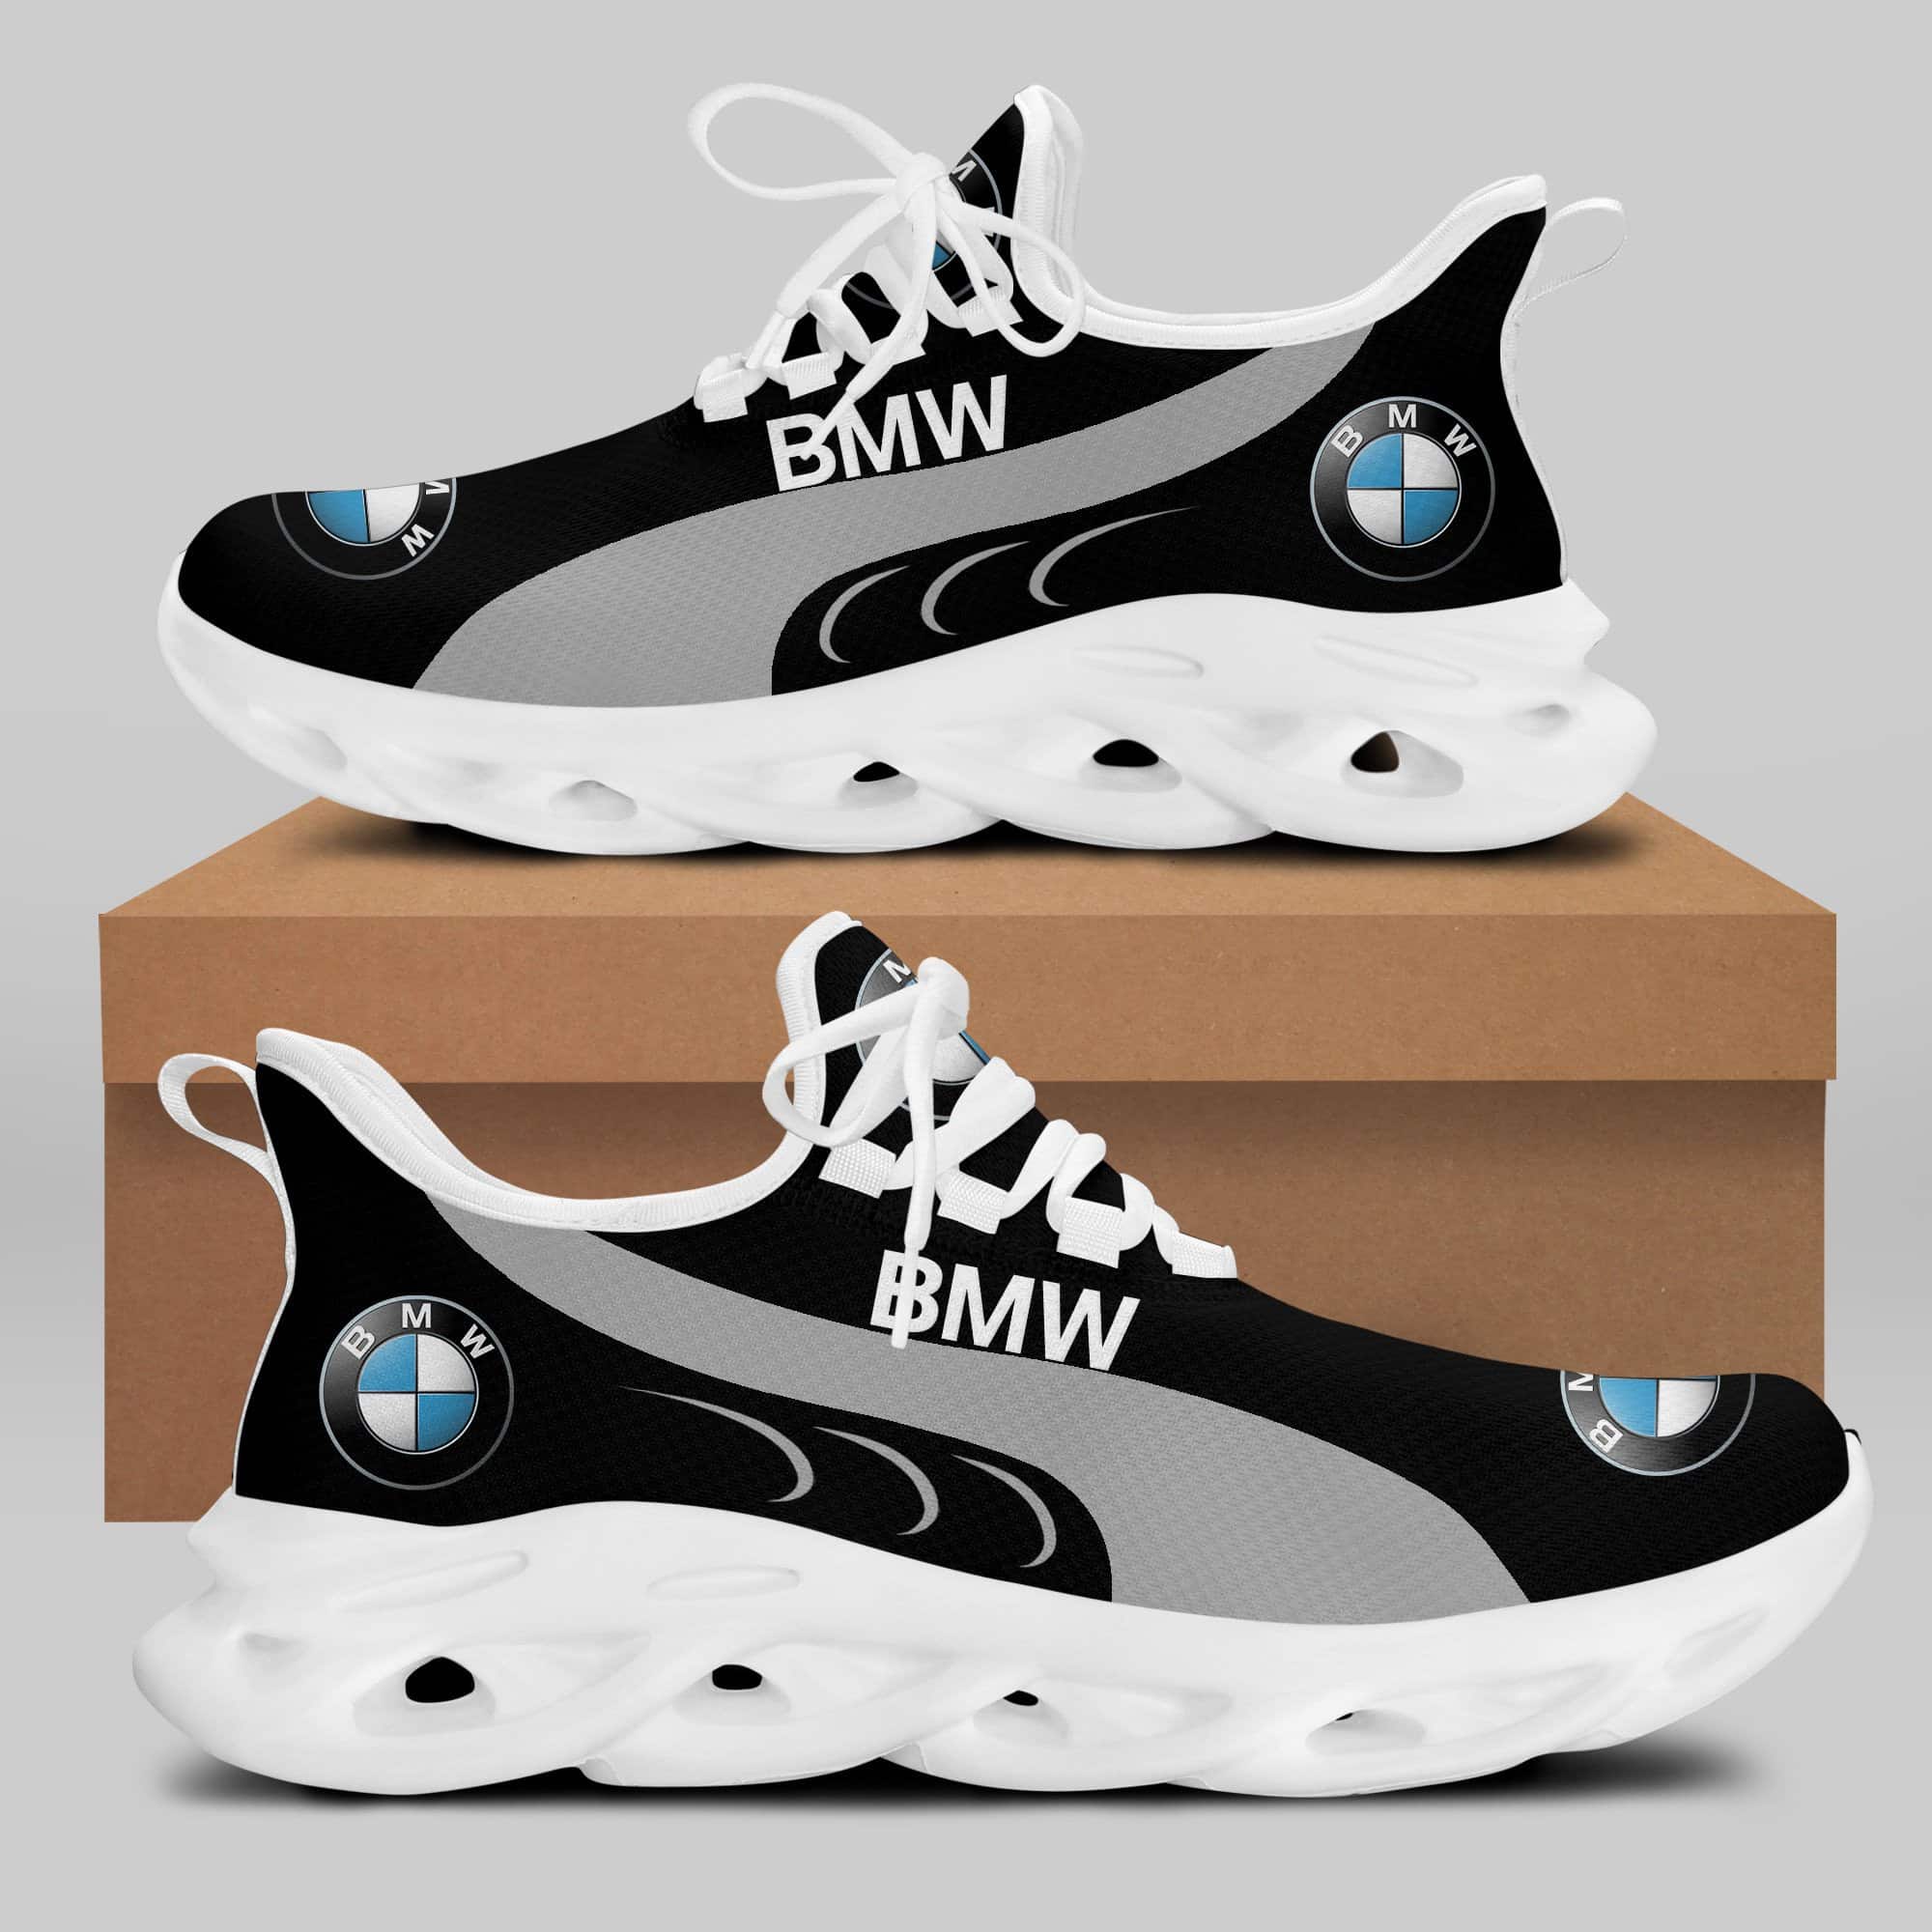 Bmw Running Shoes Max Soul Shoes Sneakers Ver 49 2